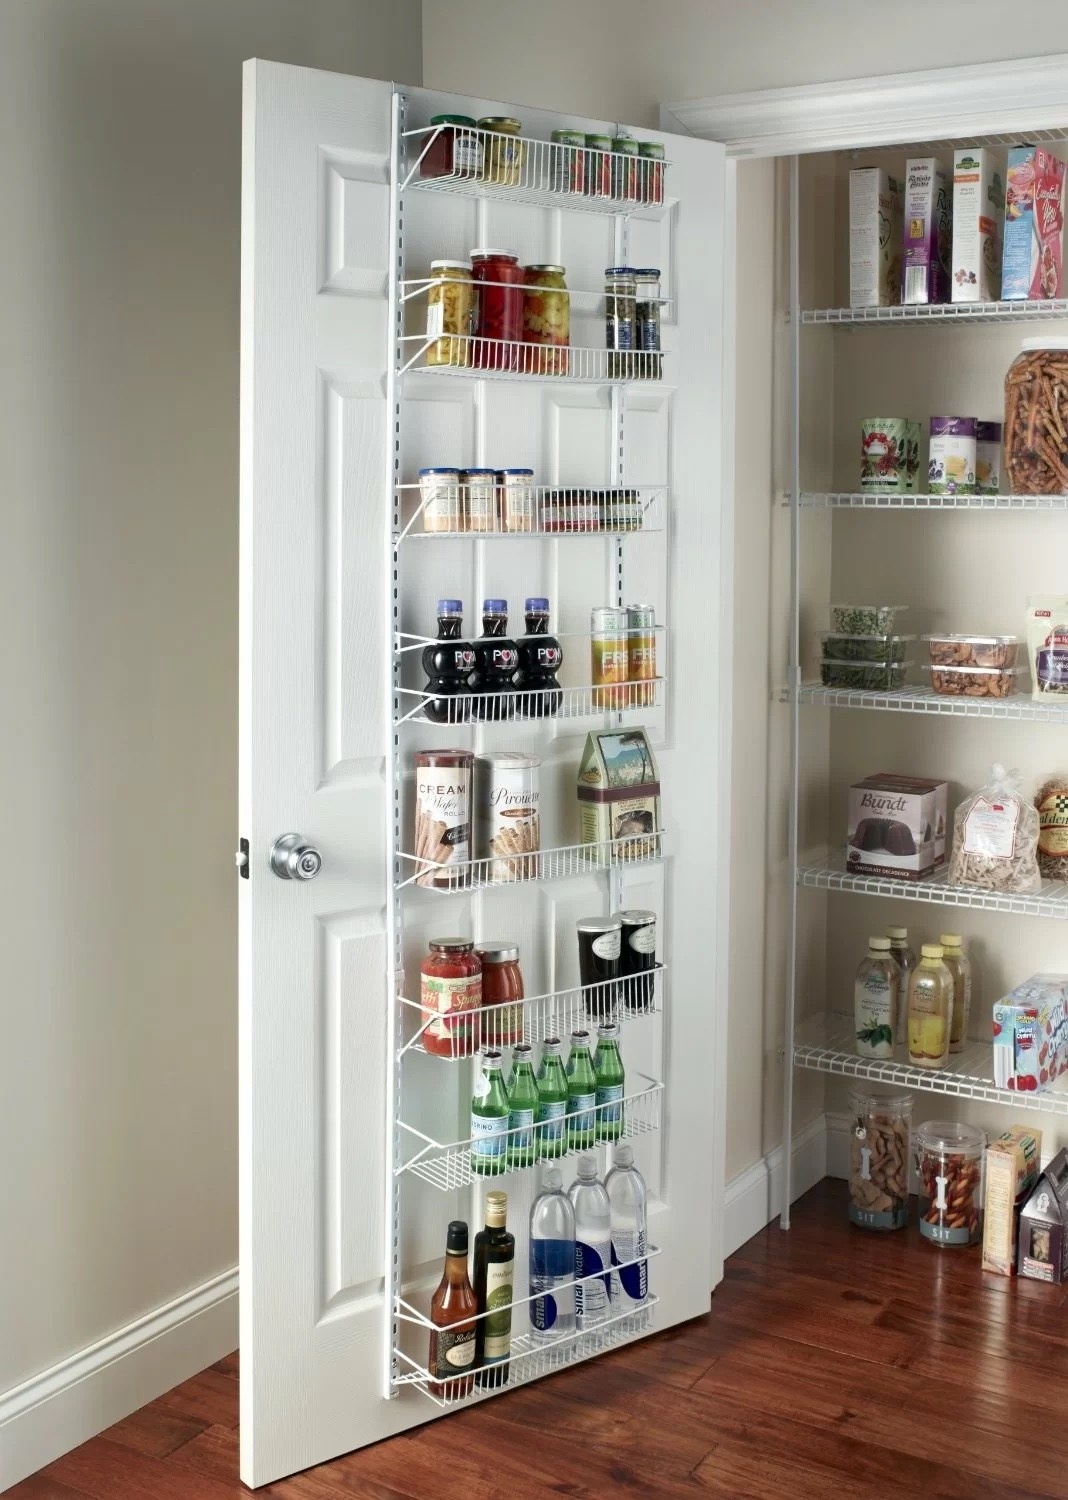 a white cabinet door organizer holding bottles, snacks, and jars